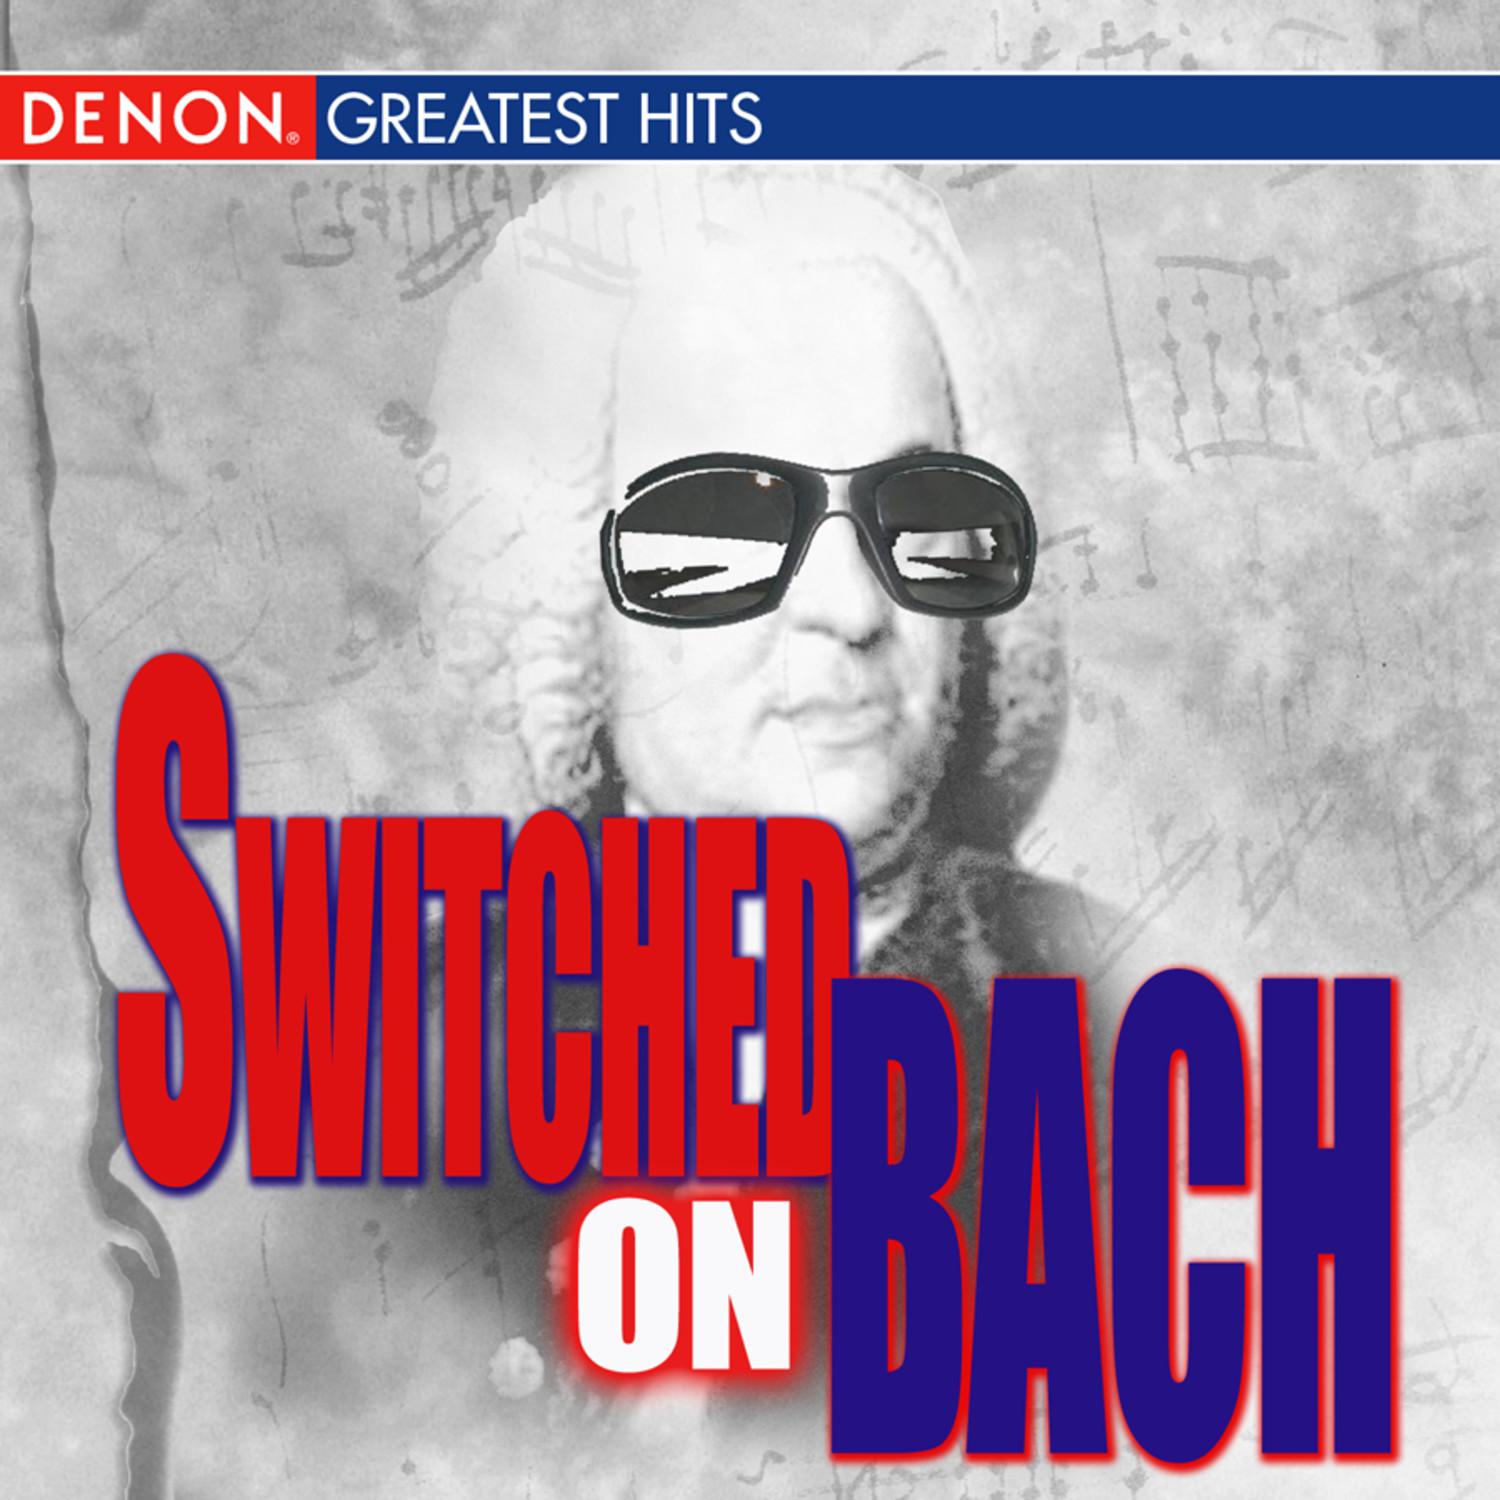 Switched on Bach